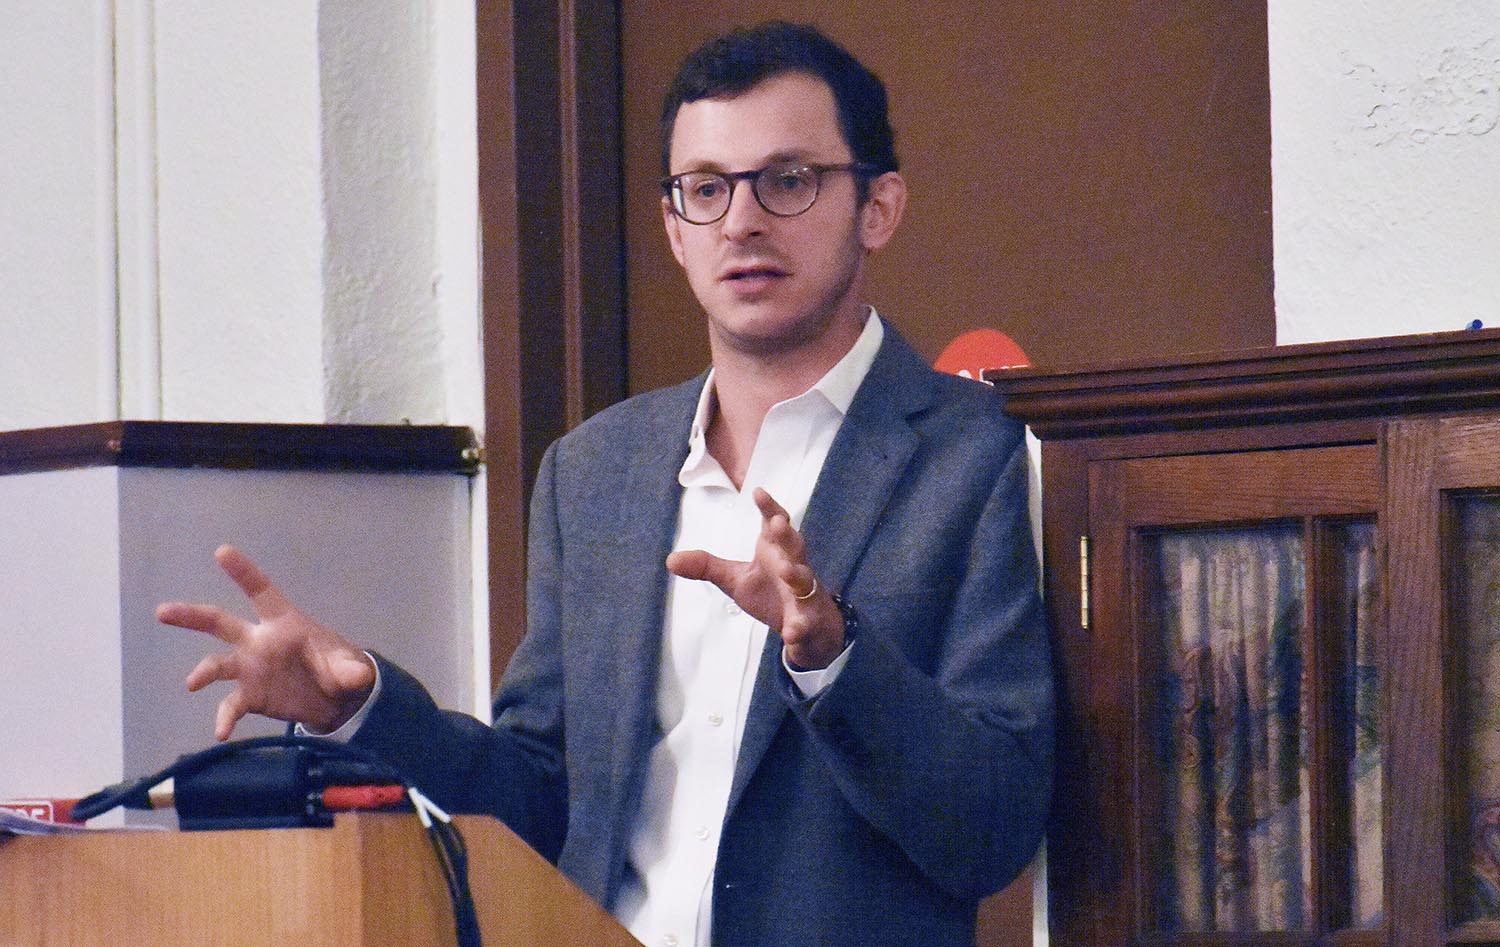 Peck, whose research explores the tensions that exist between the modern presidency and the rule of law, spoke on "Progress, Preservation, and the Constitution After Trump." His talk focused on the ways in which the Constitution aids and constrains reform movements in American politics. 